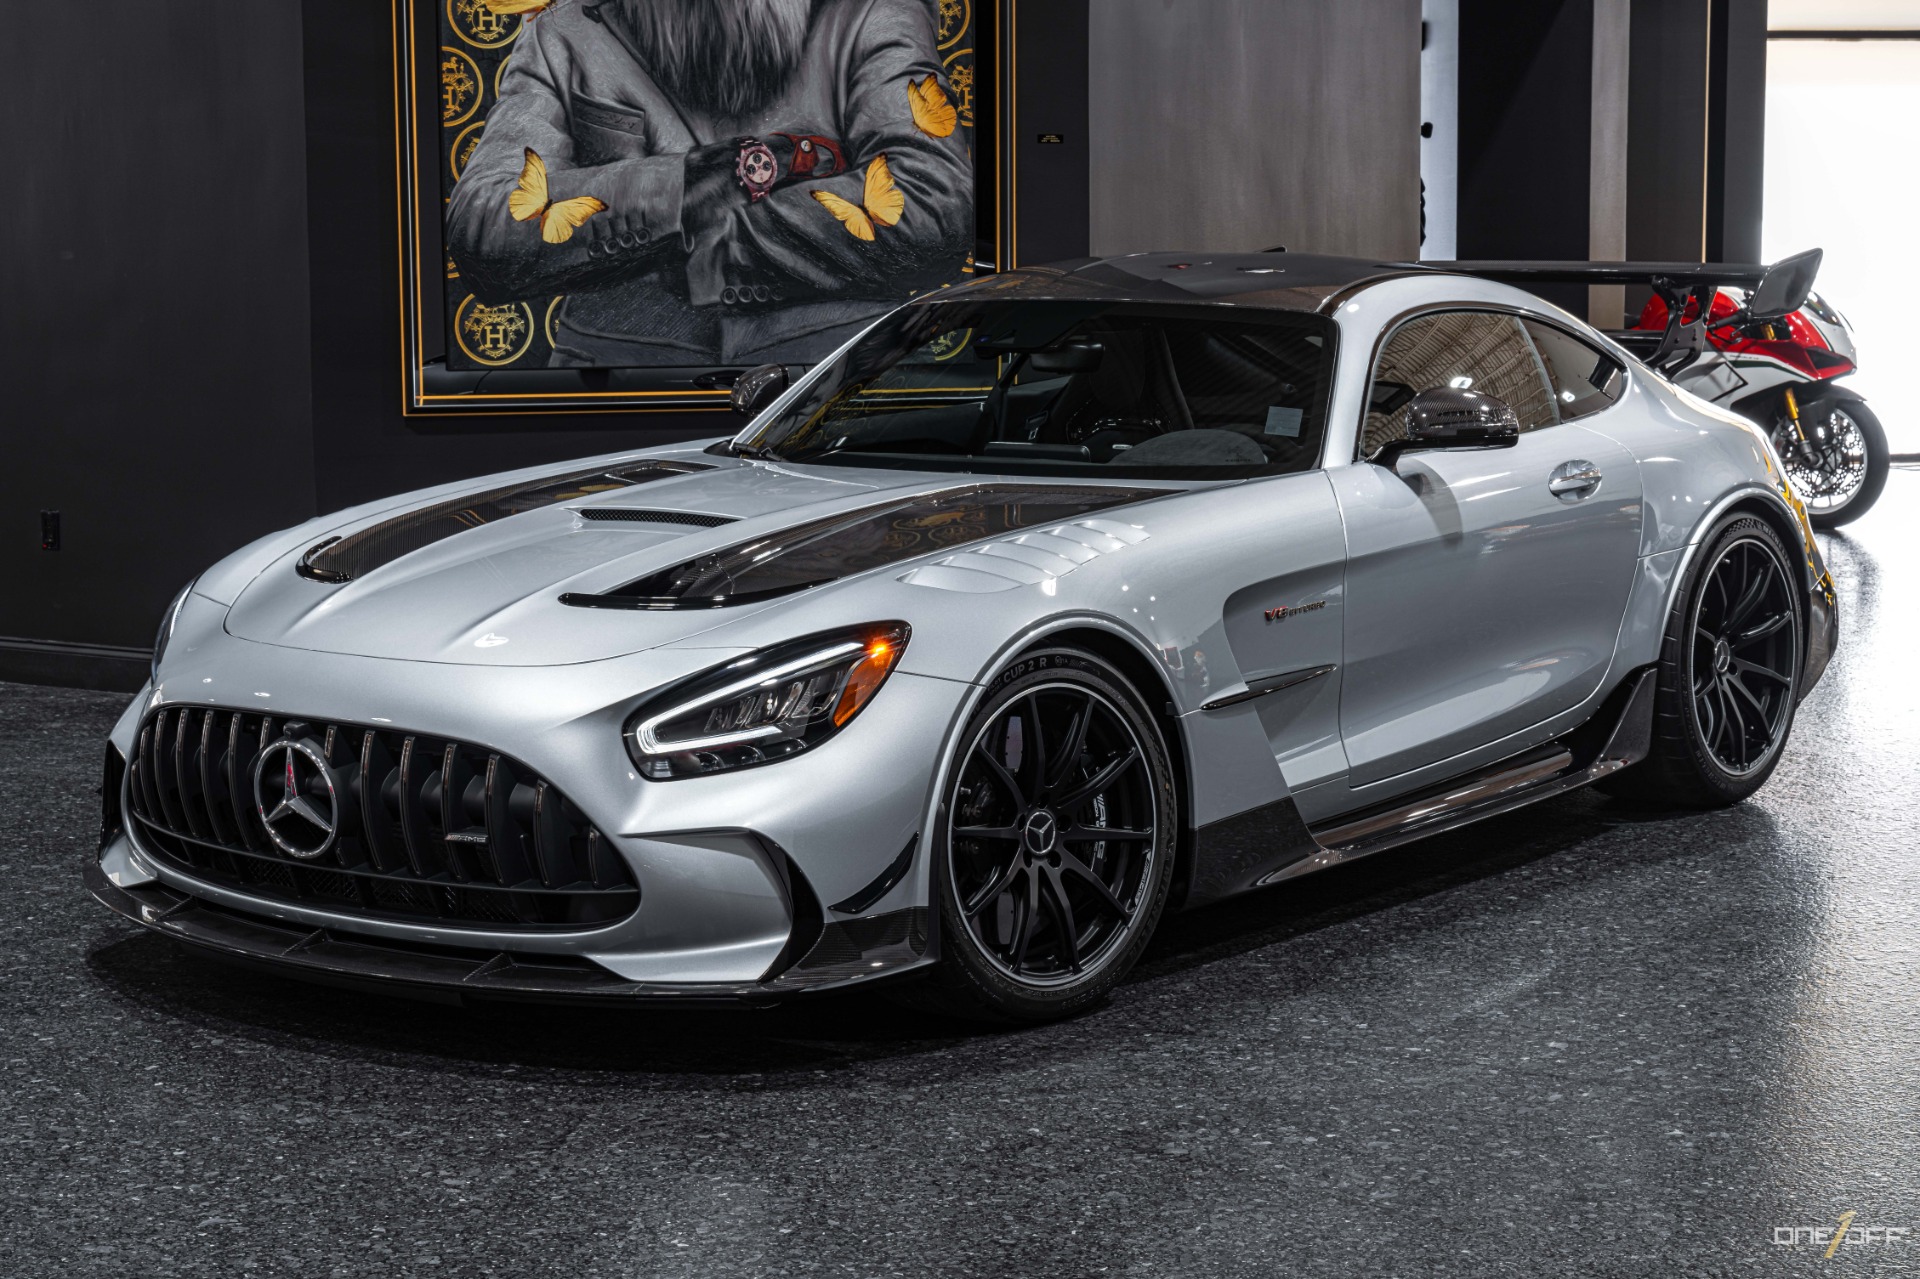 Used 2021 Mercedes-Benz AMG GT Black Series w/ Full PPF For Sale ($399,000)